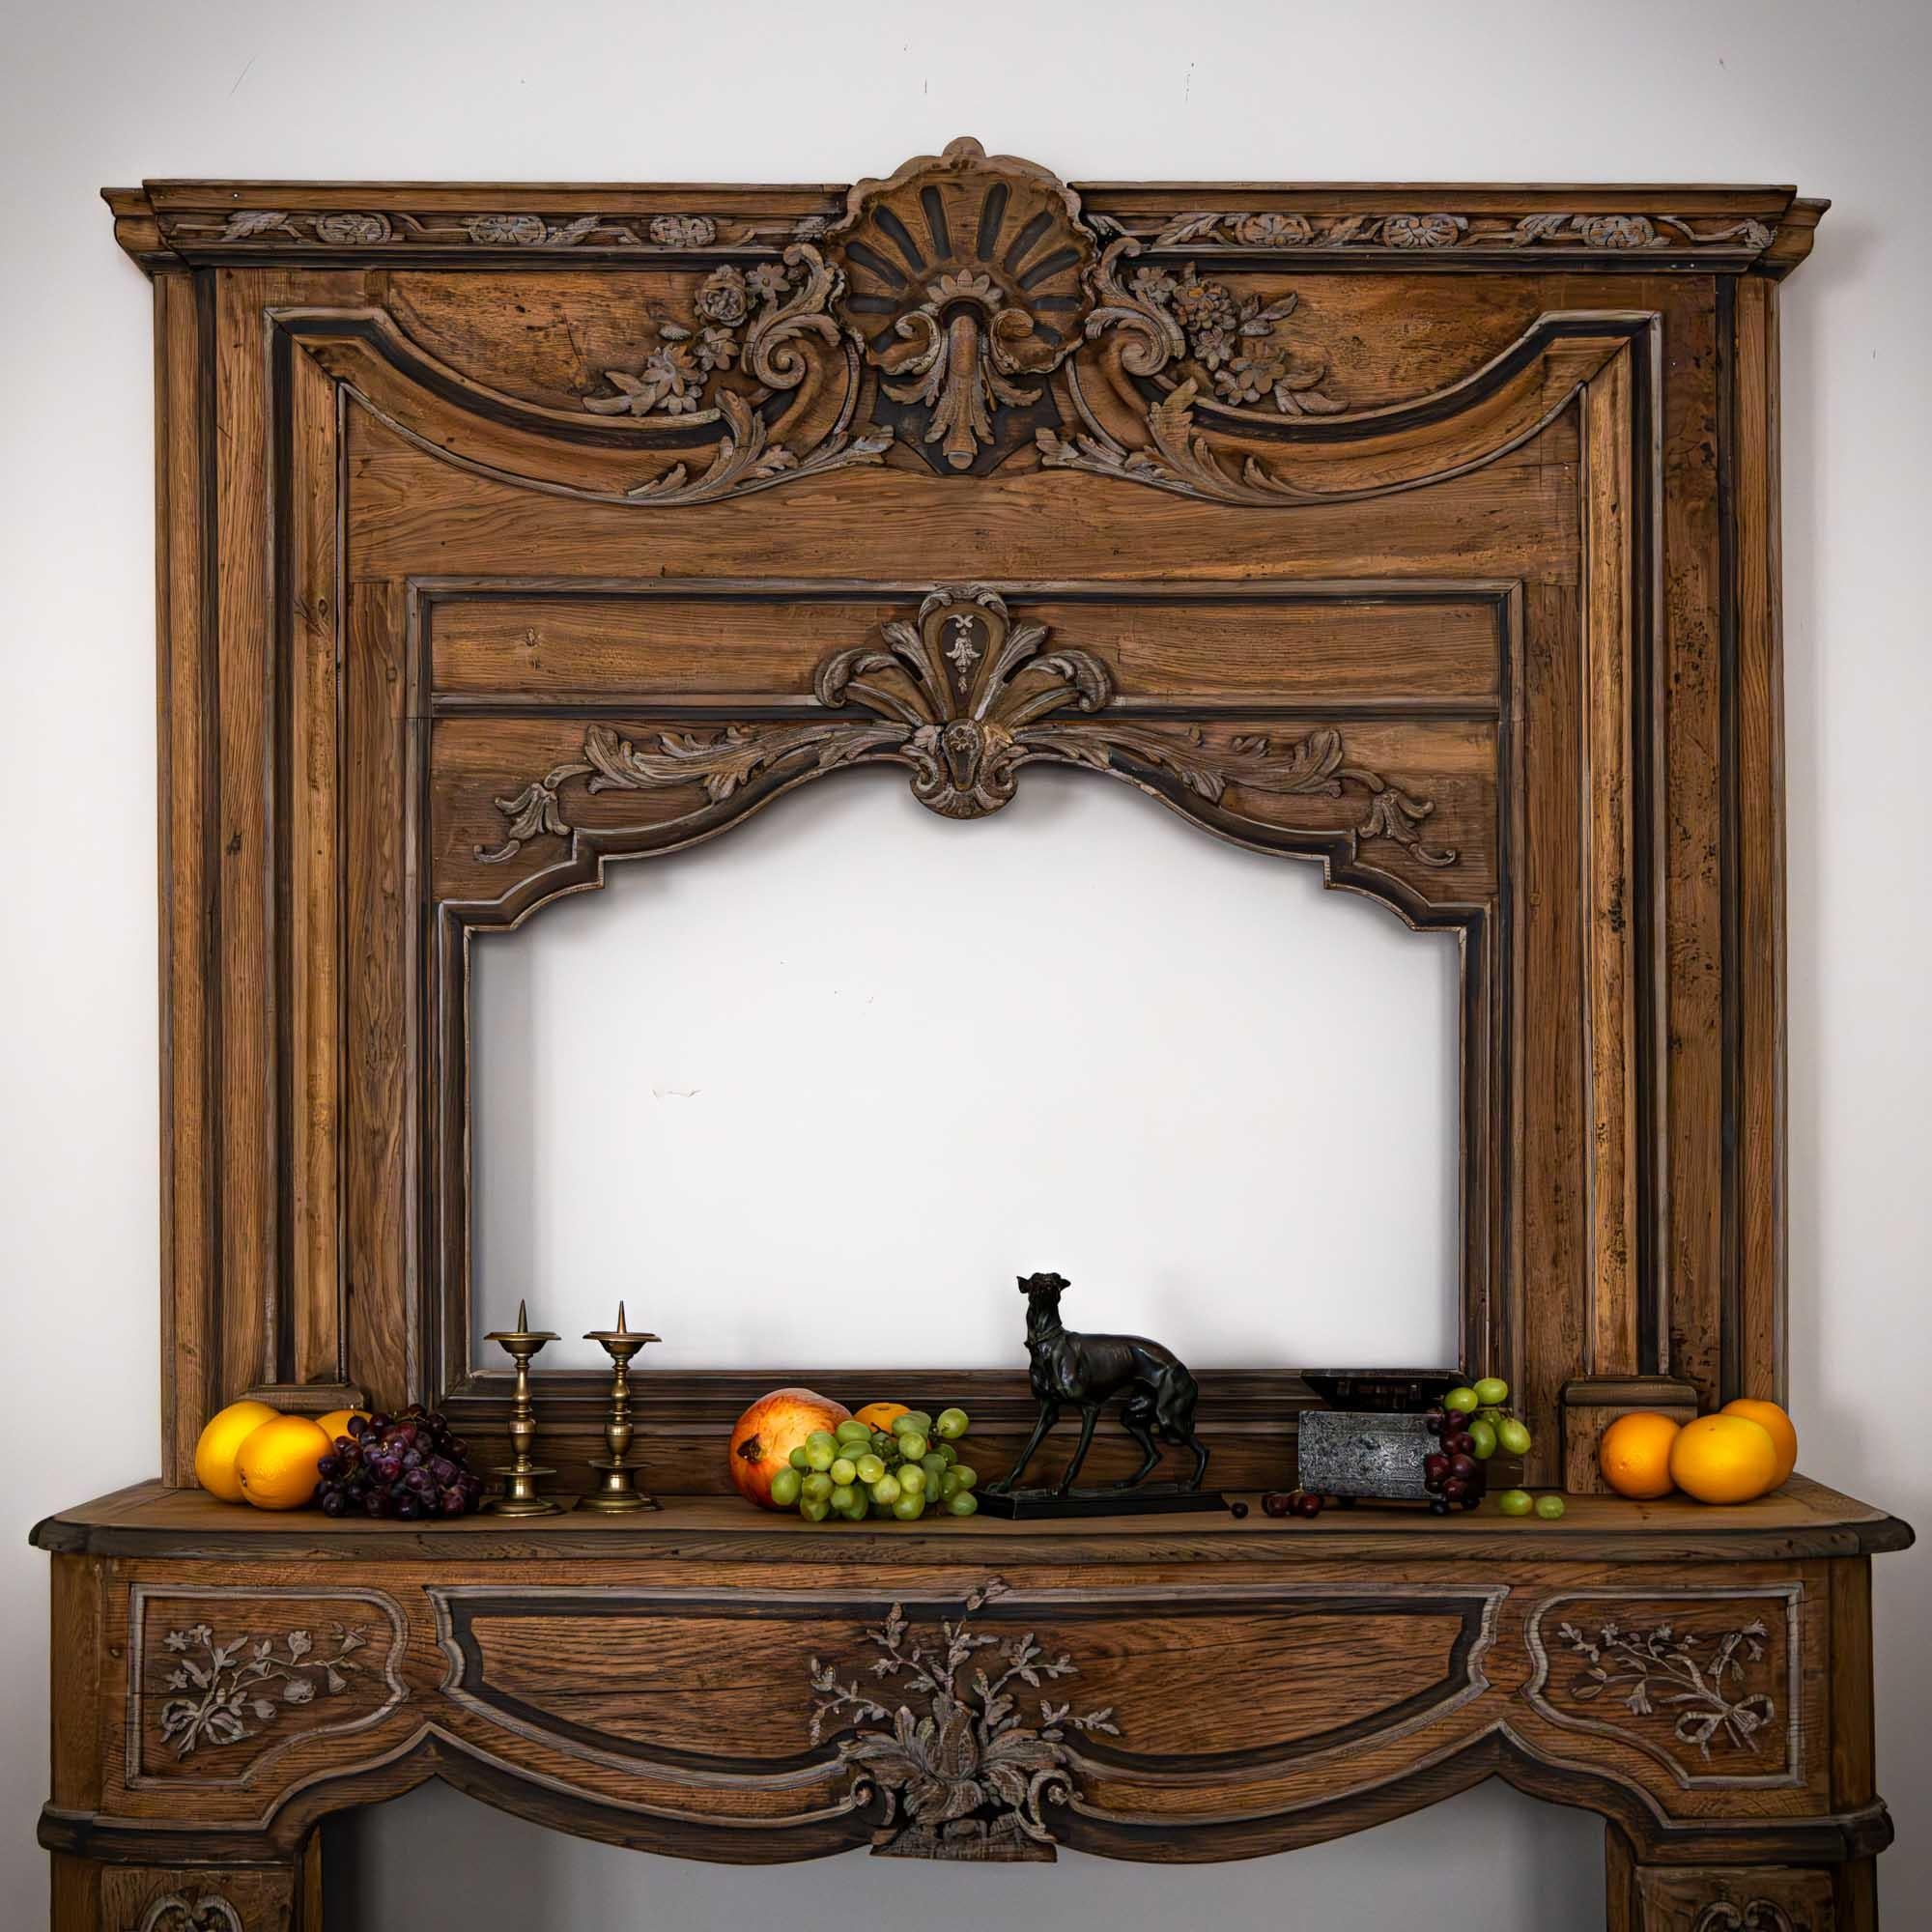 Carved Baroque Mantelpiece Fireplace with Mirror Slot, carved Oak, Germany 18th Century